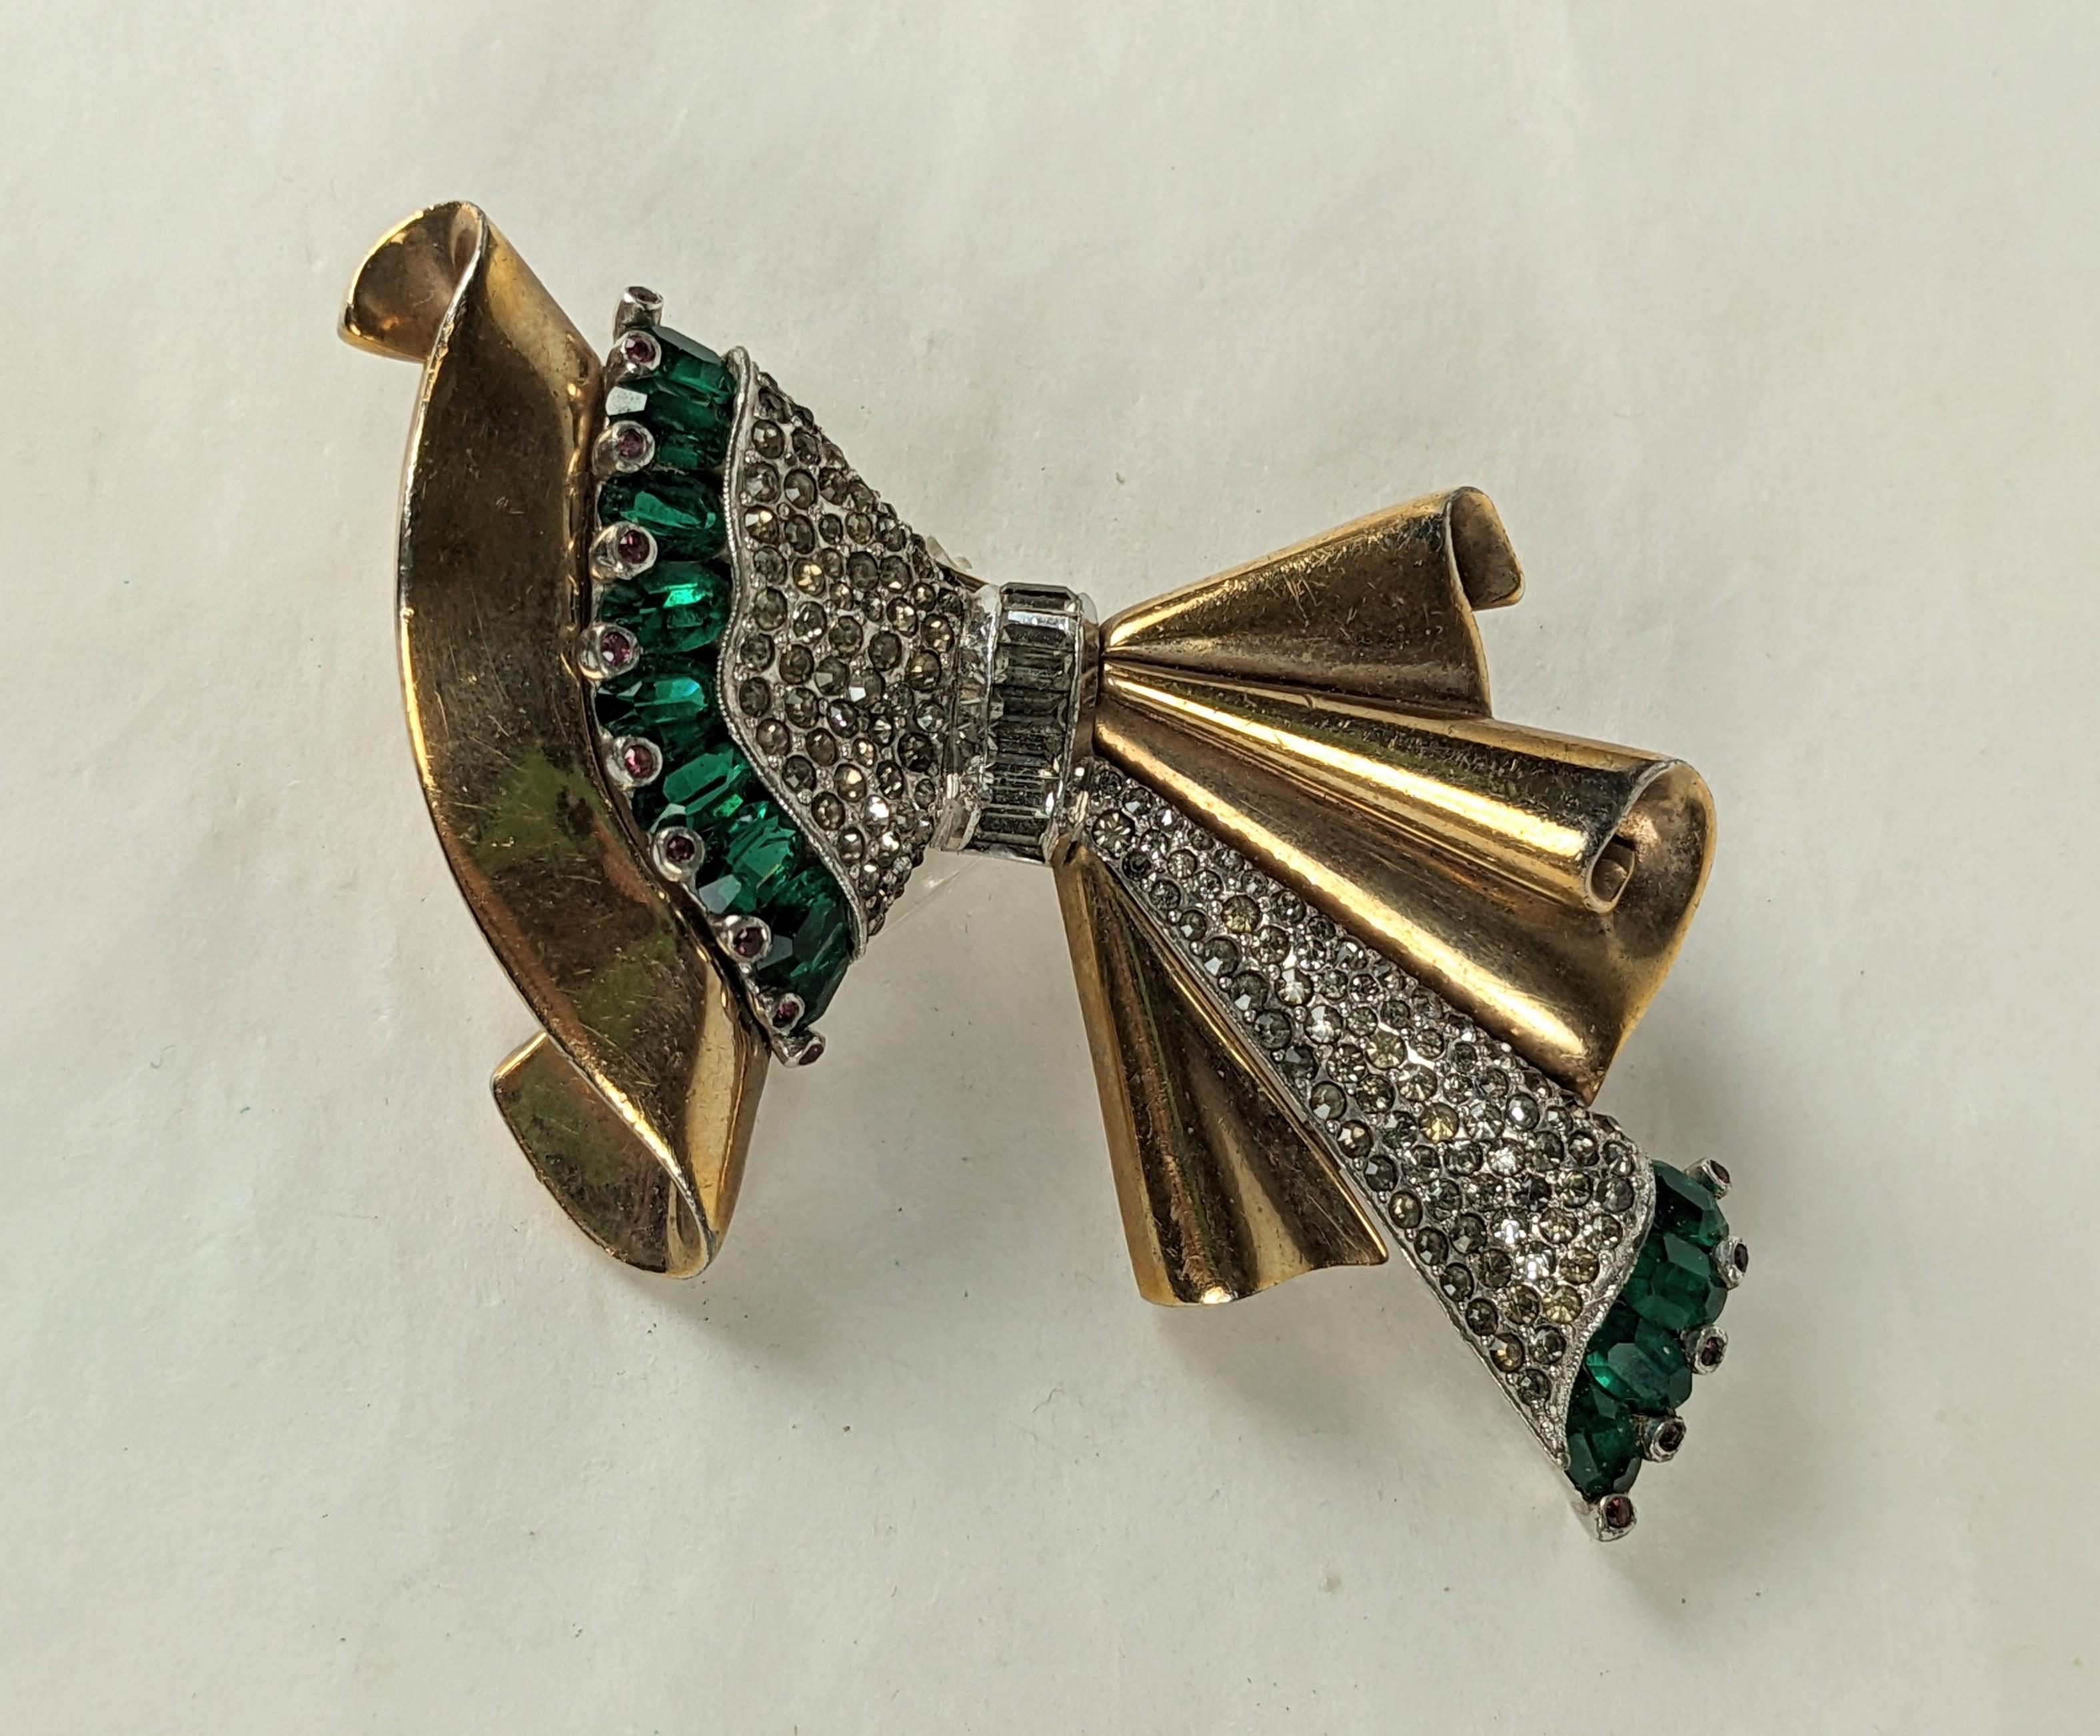 Pennino Retro Gathered Bow Brooch In Good Condition For Sale In New York, NY